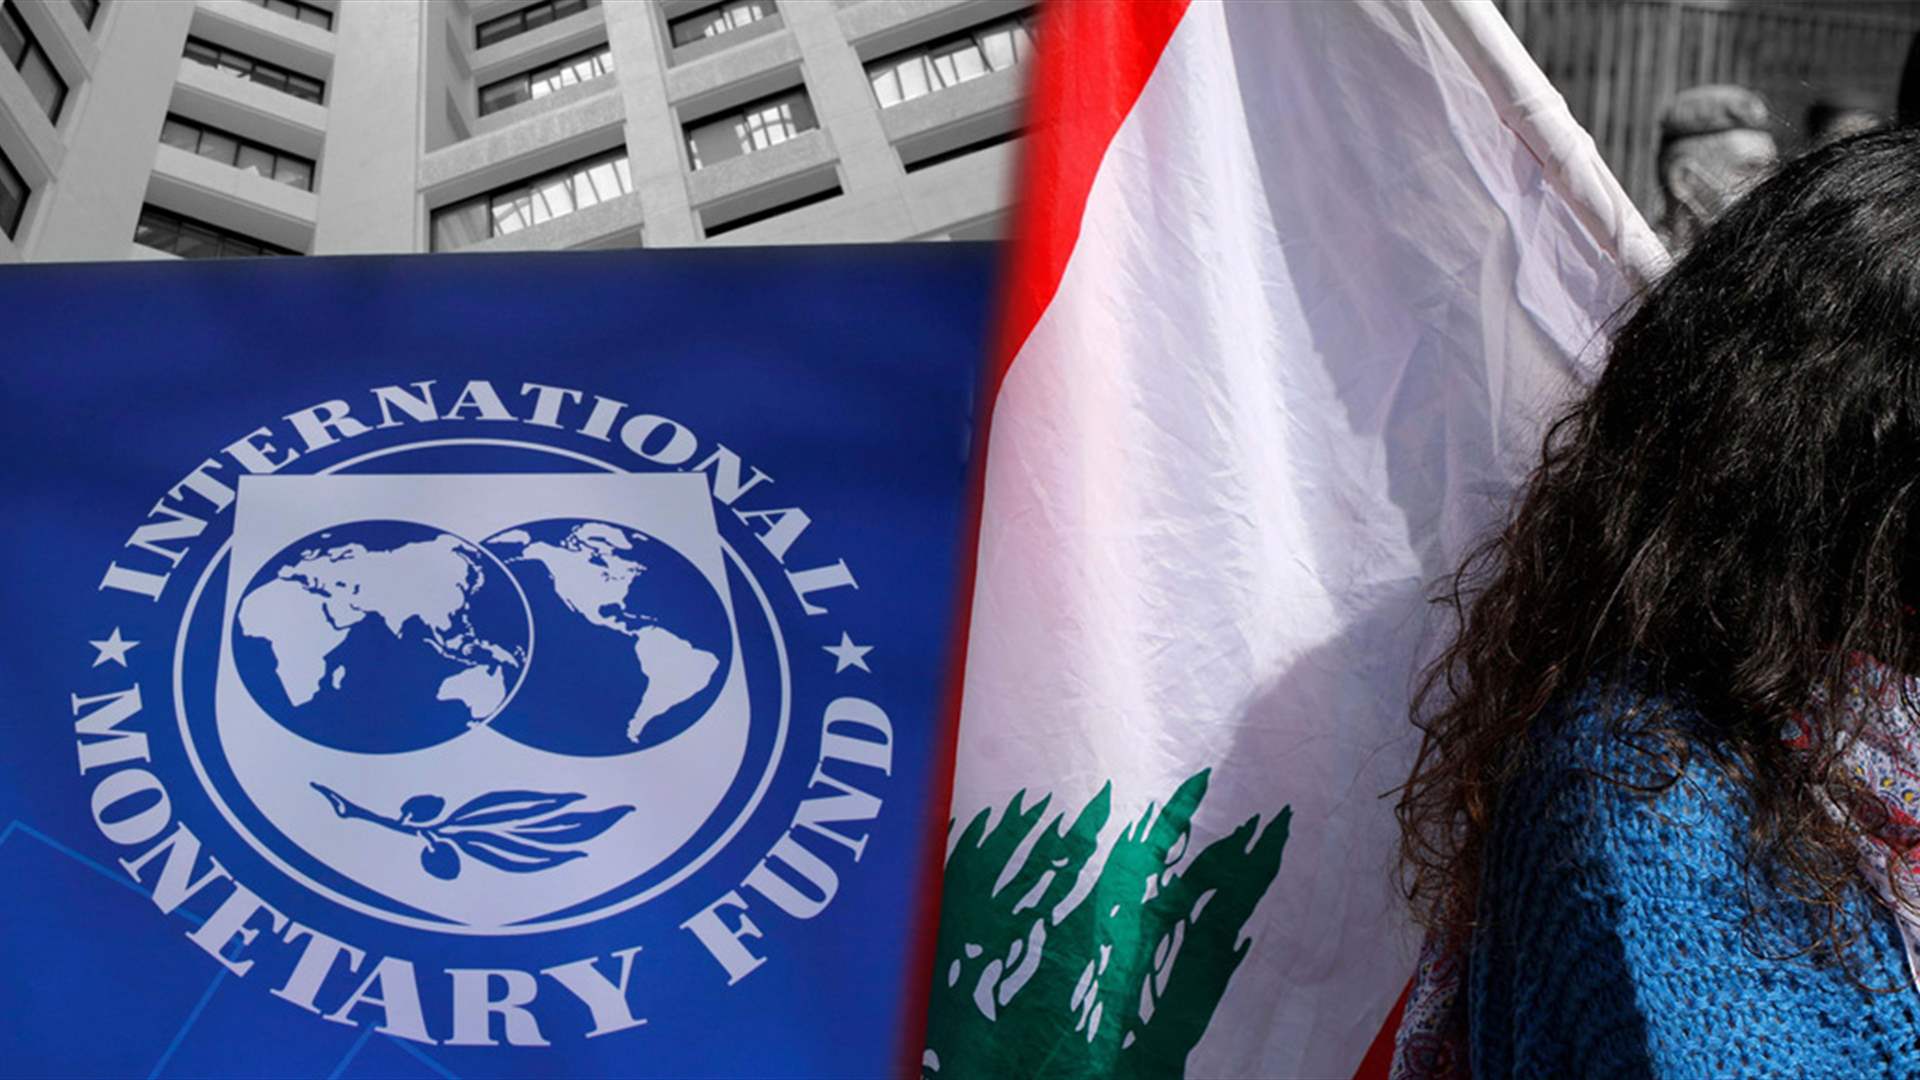 IMF&#39;s upcoming report on Lebanon set to deliver grim assessment of economic crisis